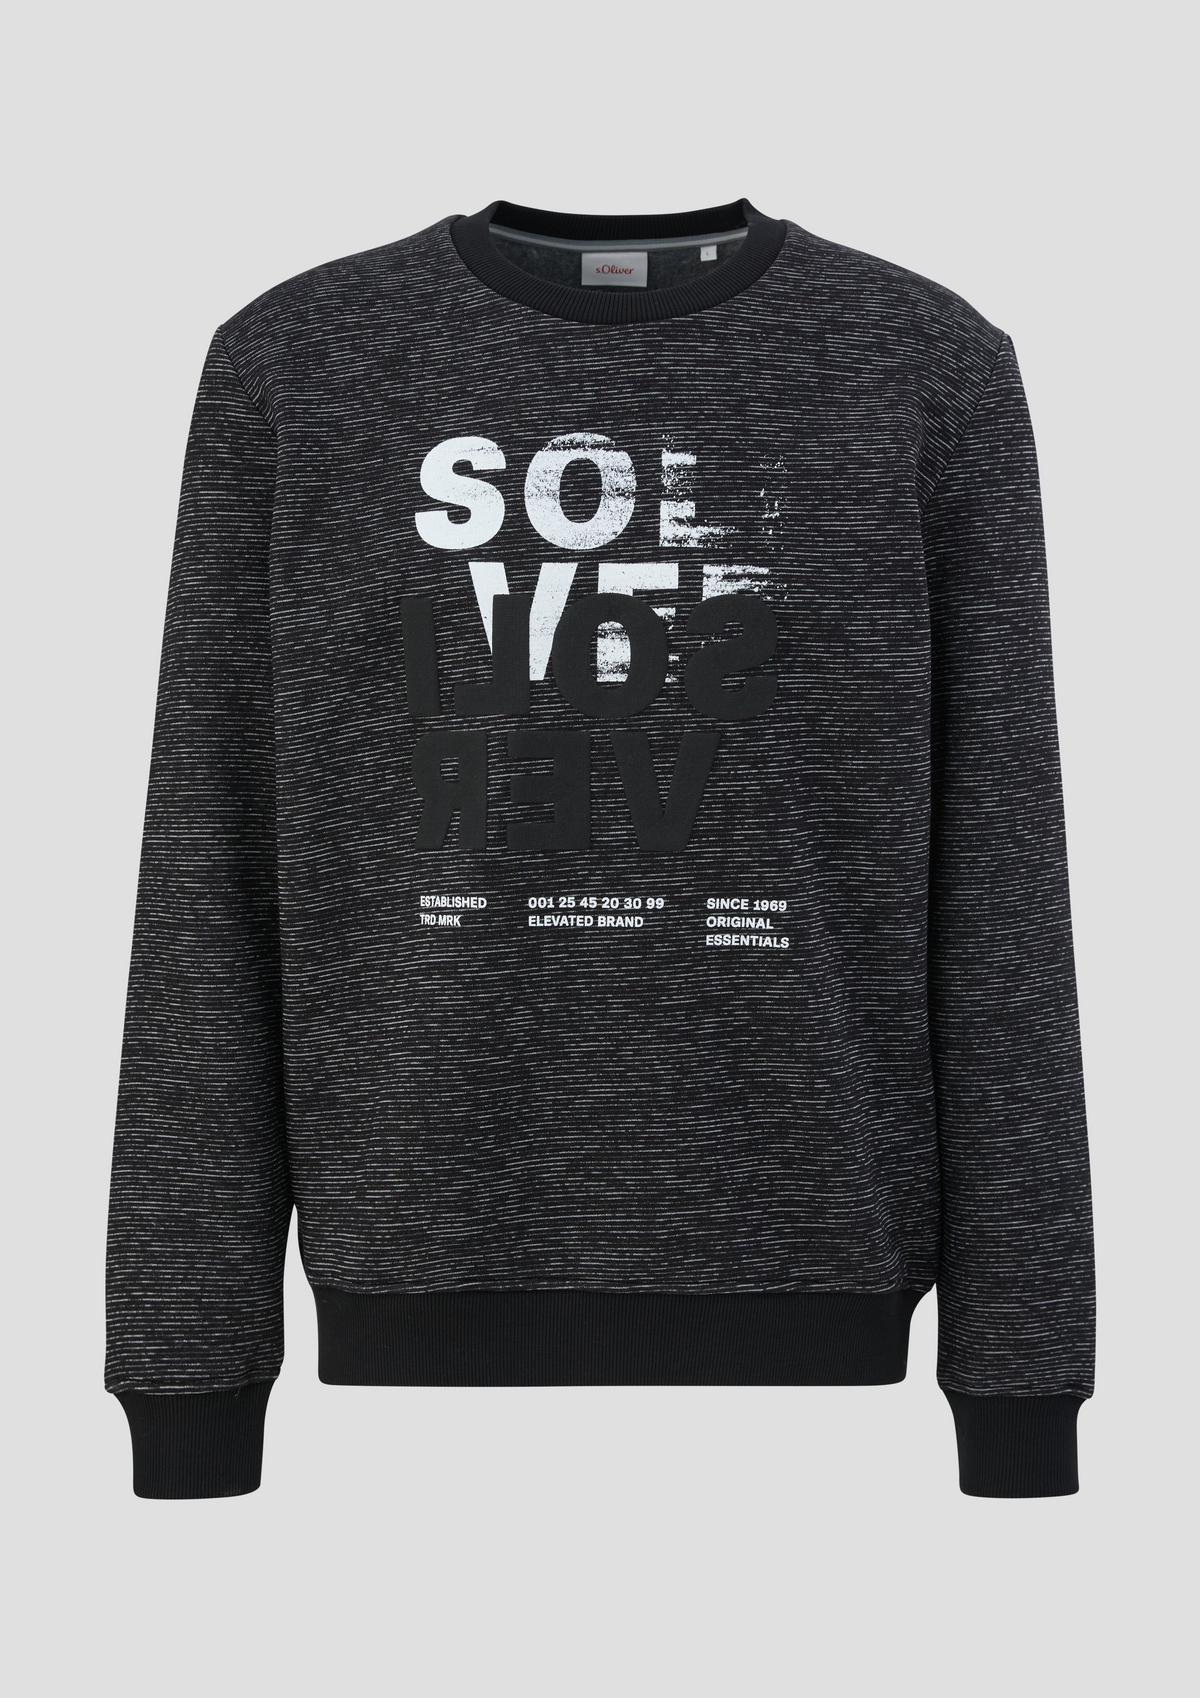 s.Oliver Sweatshirt with rubberised printed lettering